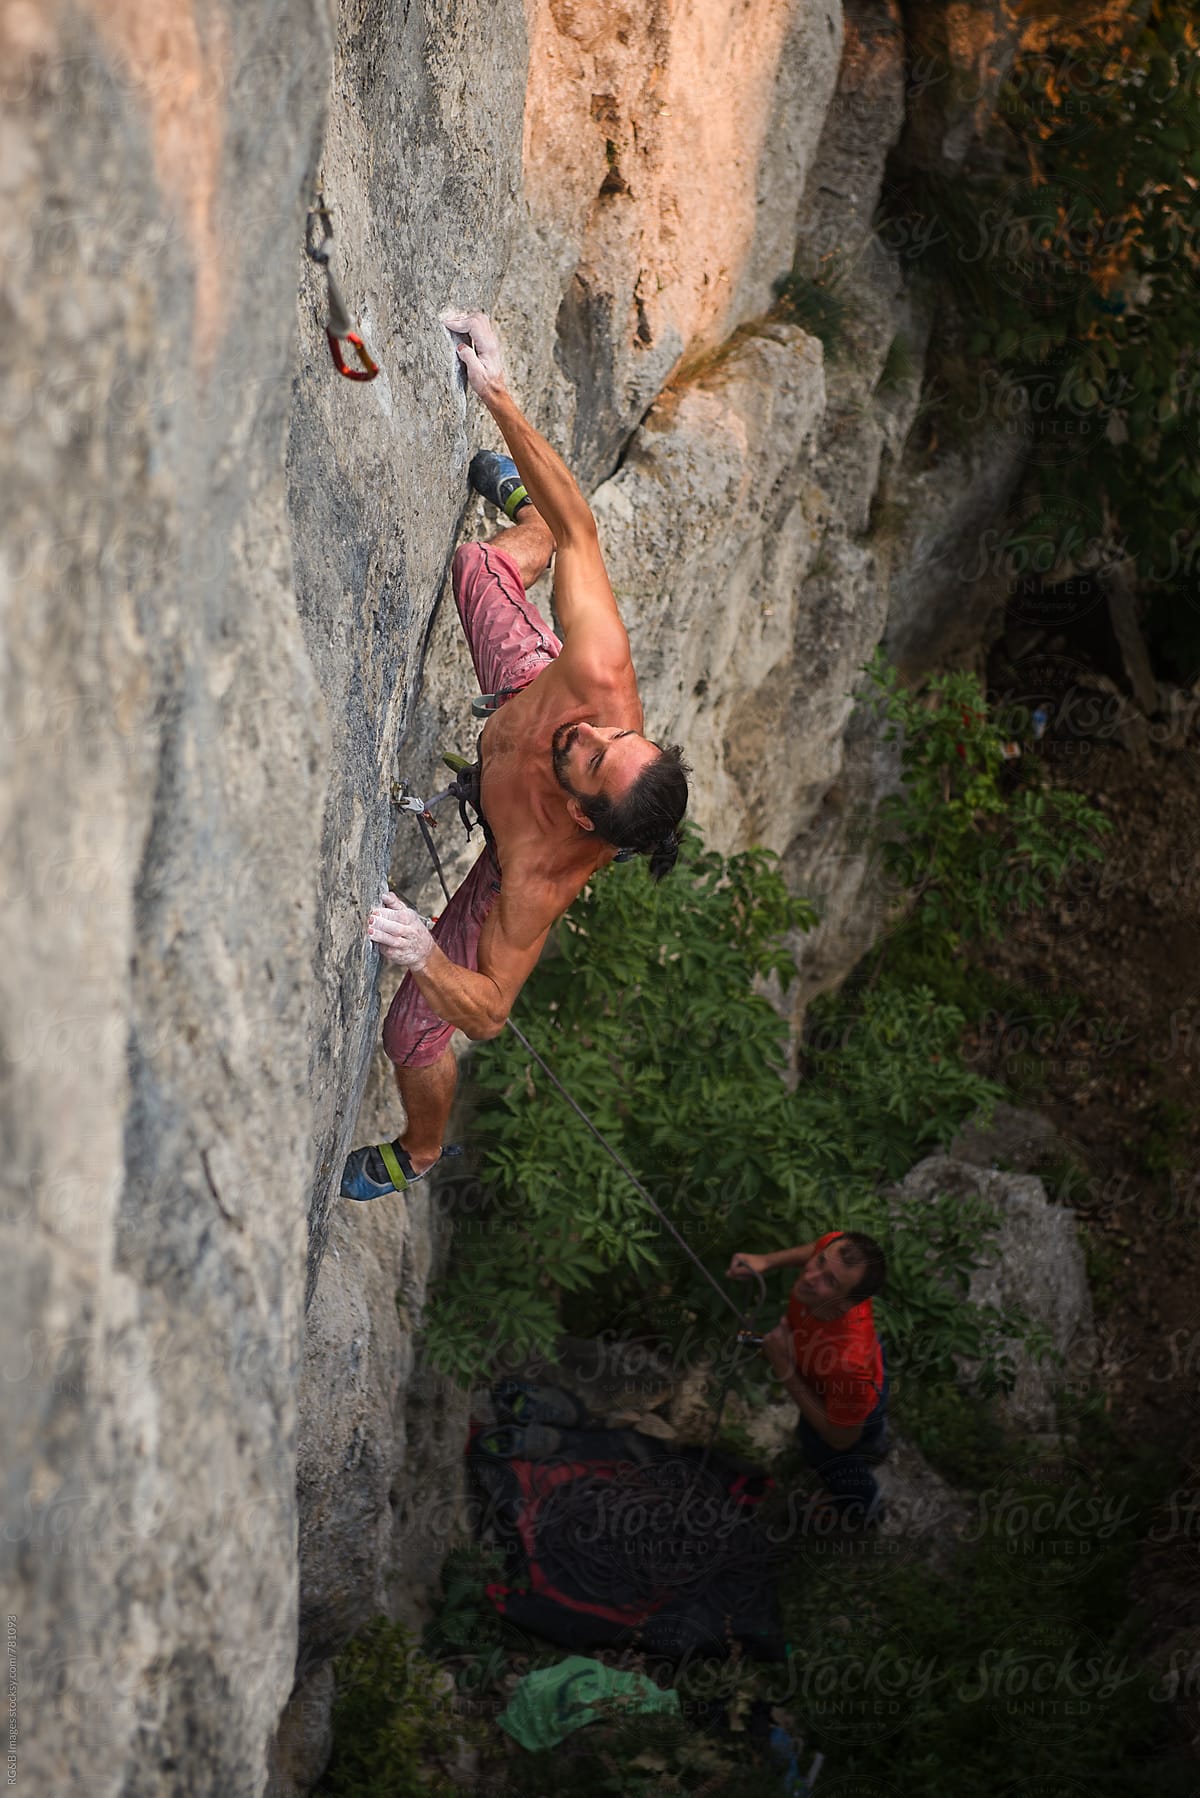 Strong man rock climbing a hard route outdoor at sunset